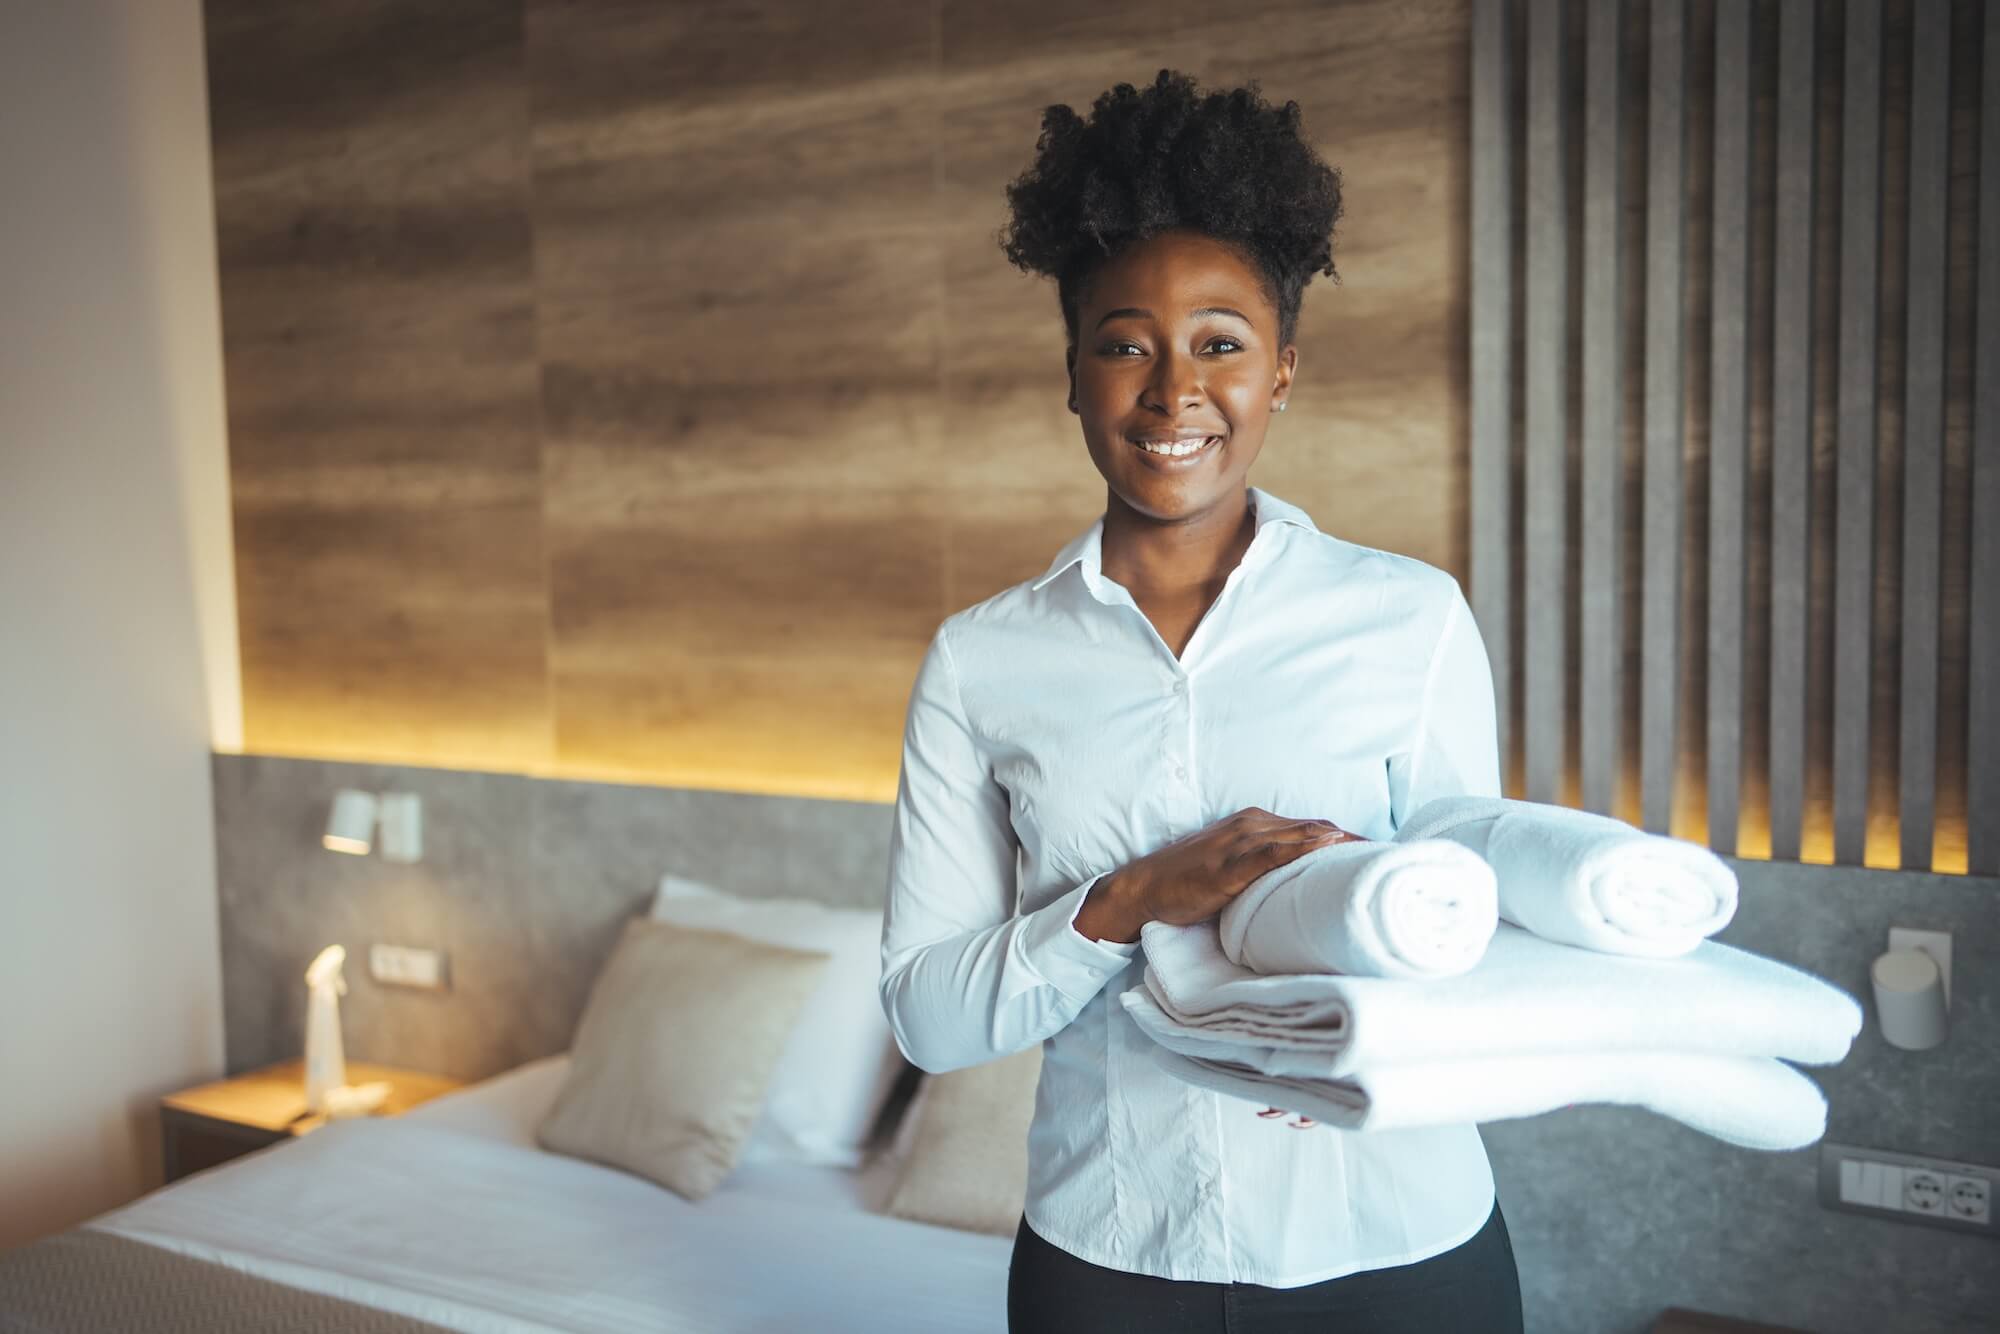 Brookhaven GA Housekeeping services, hire a housekeeper in Brookhaven GA